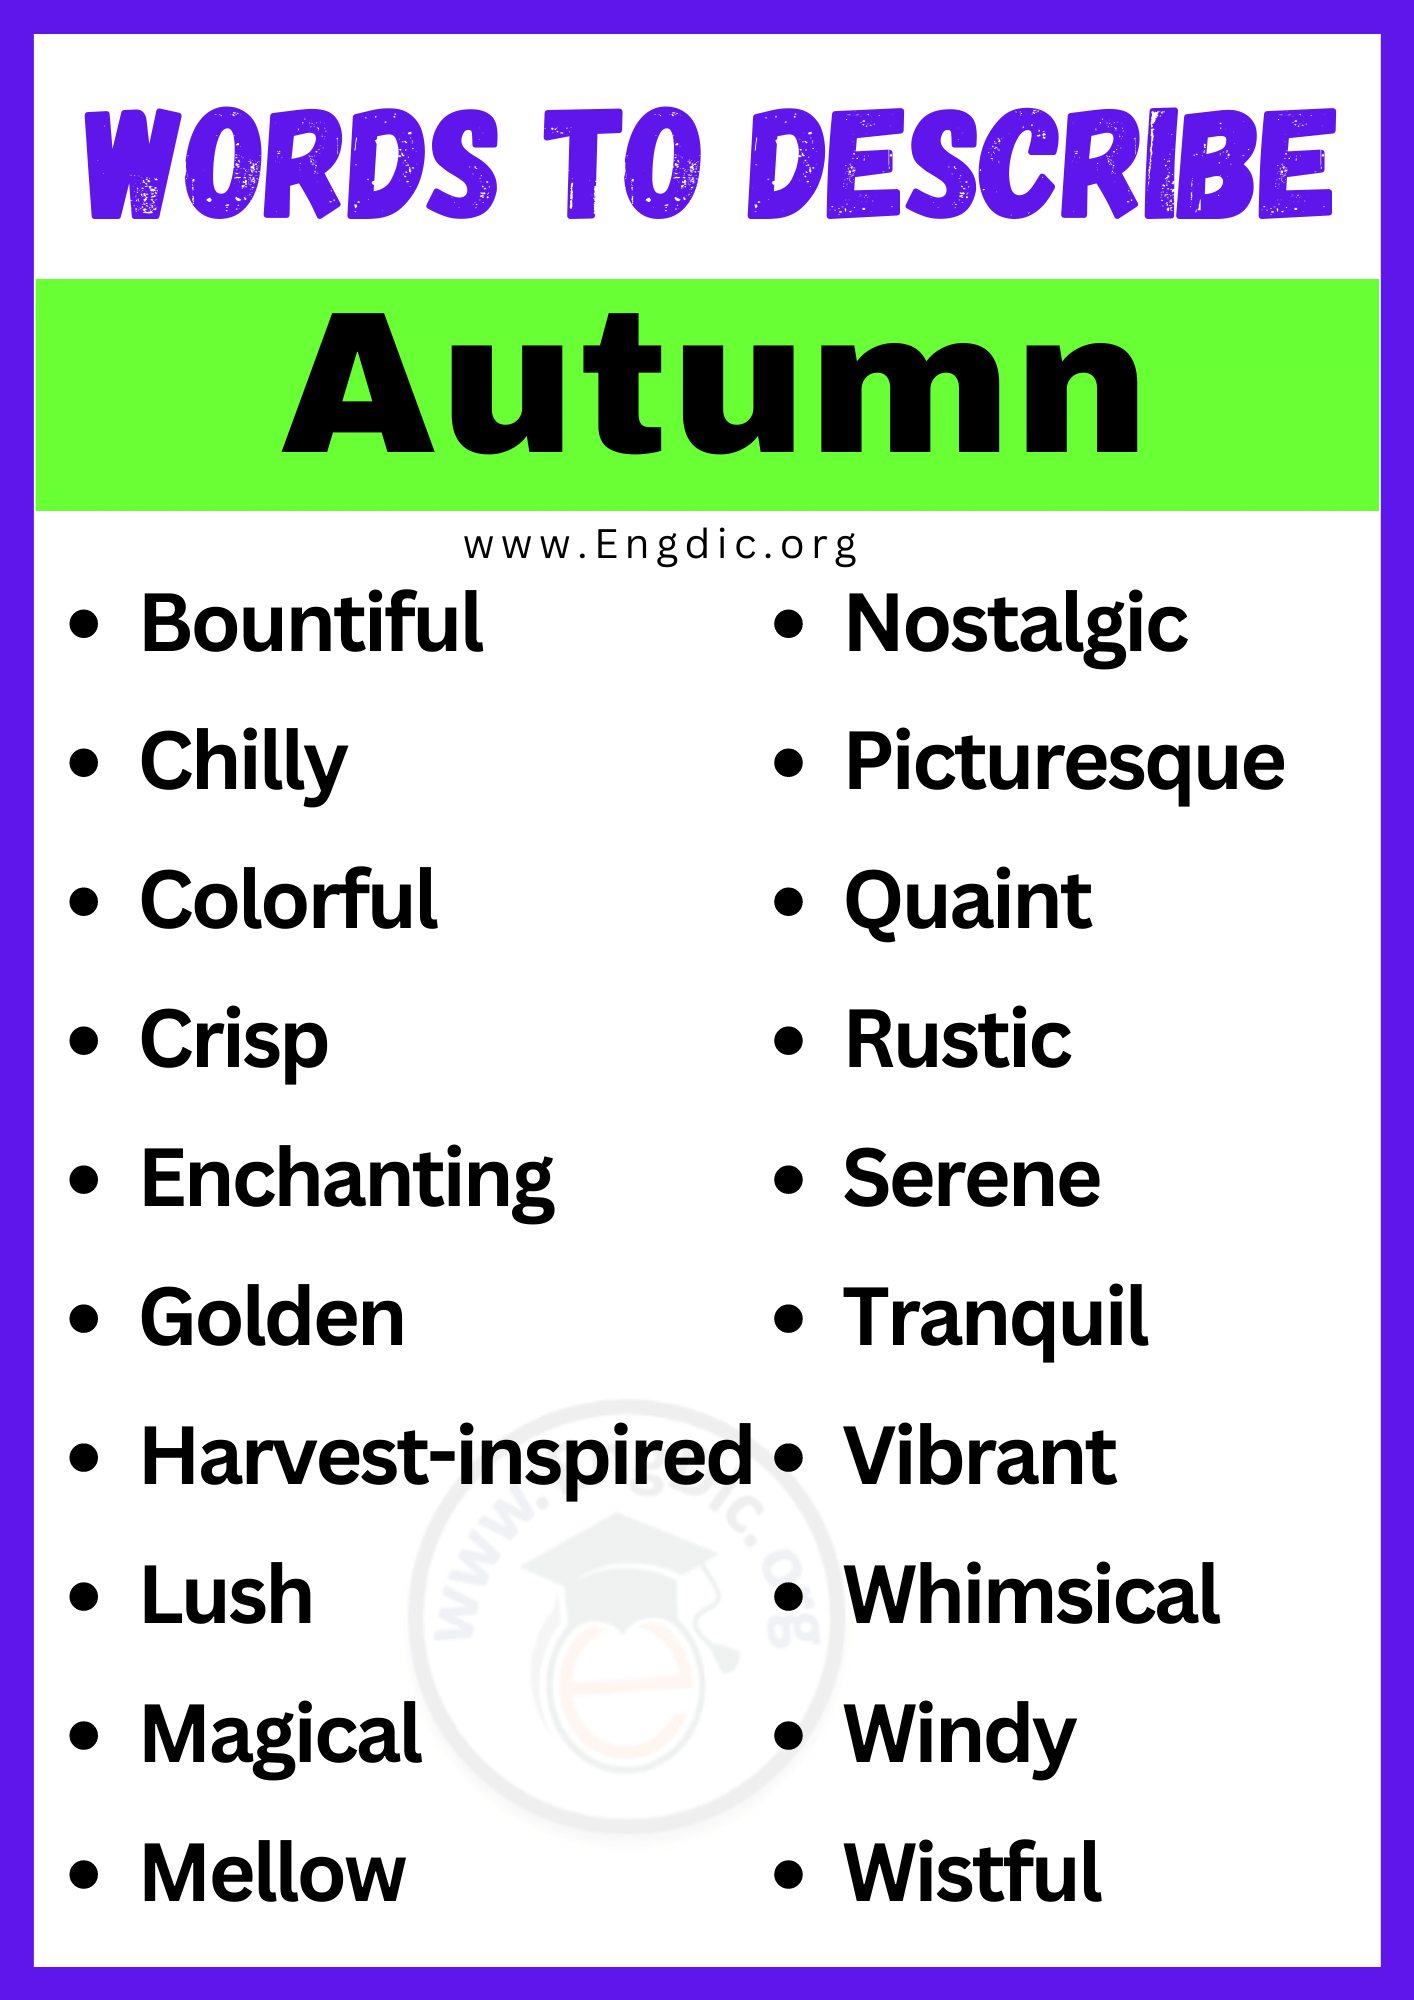 20-best-words-to-describe-autumn-adjectives-for-autumn-engdic